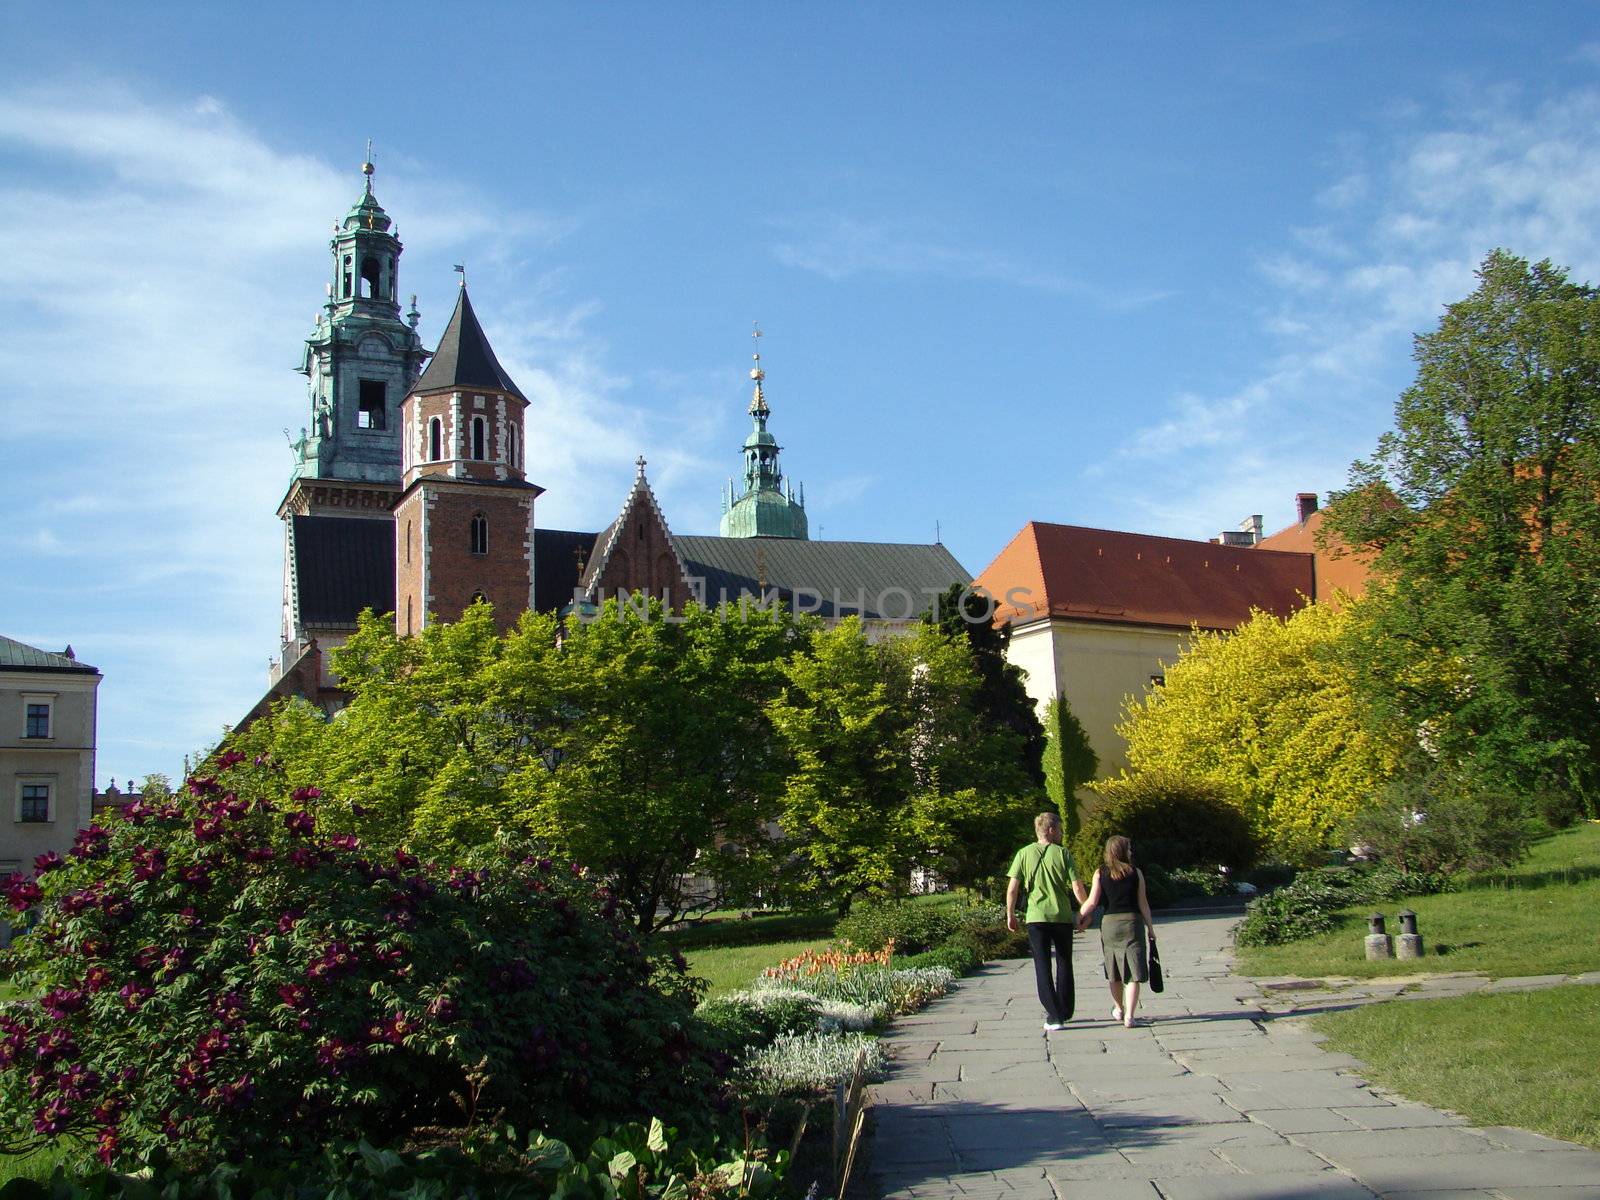 royal cathedral in Cracow on Wawel Hill, Poland